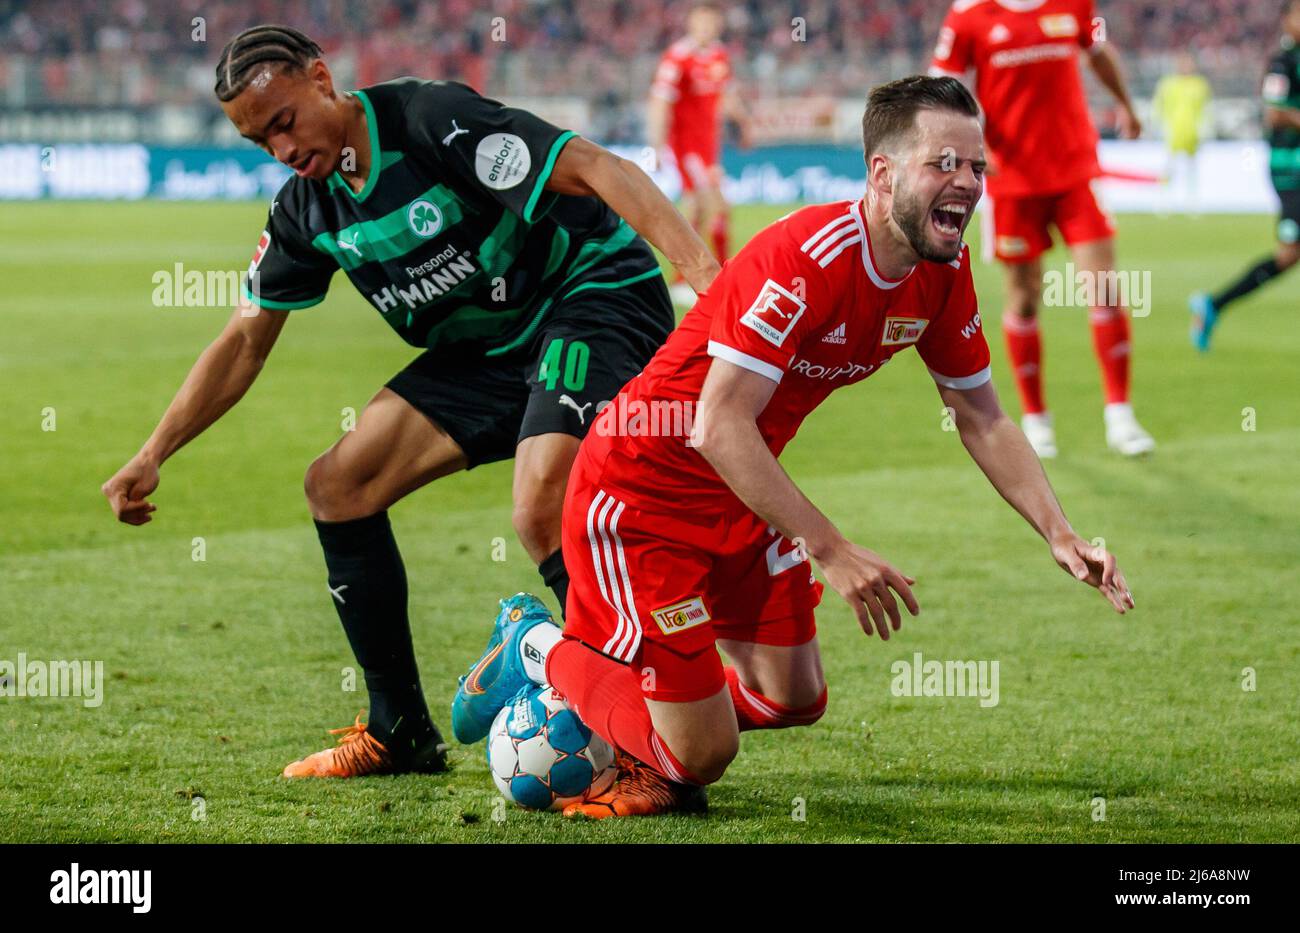 Germany. 29th Apr, 2022. 29 April 2022, Berlin: Soccer: Bundesliga, 1. FC Union Berlin - SpVgg Greuther Fürth, Matchday 32, An der Alten Försterei. Berlin's Niko Gießelmann (r) goes down after a foul by Greuther Fürth's Jamie Leweling. Photo: Andreas Gora/dpa - IMPORTANT NOTE: In accordance with the requirements of the DFL Deutsche Fußball Liga and the DFB Deutscher Fußball-Bund, it is prohibited to use or have used photographs taken in the stadium and/or of the match in the form of sequence pictures and/or video-like photo series. Credit: dpa picture alliance/Alamy Live News Stock Photo